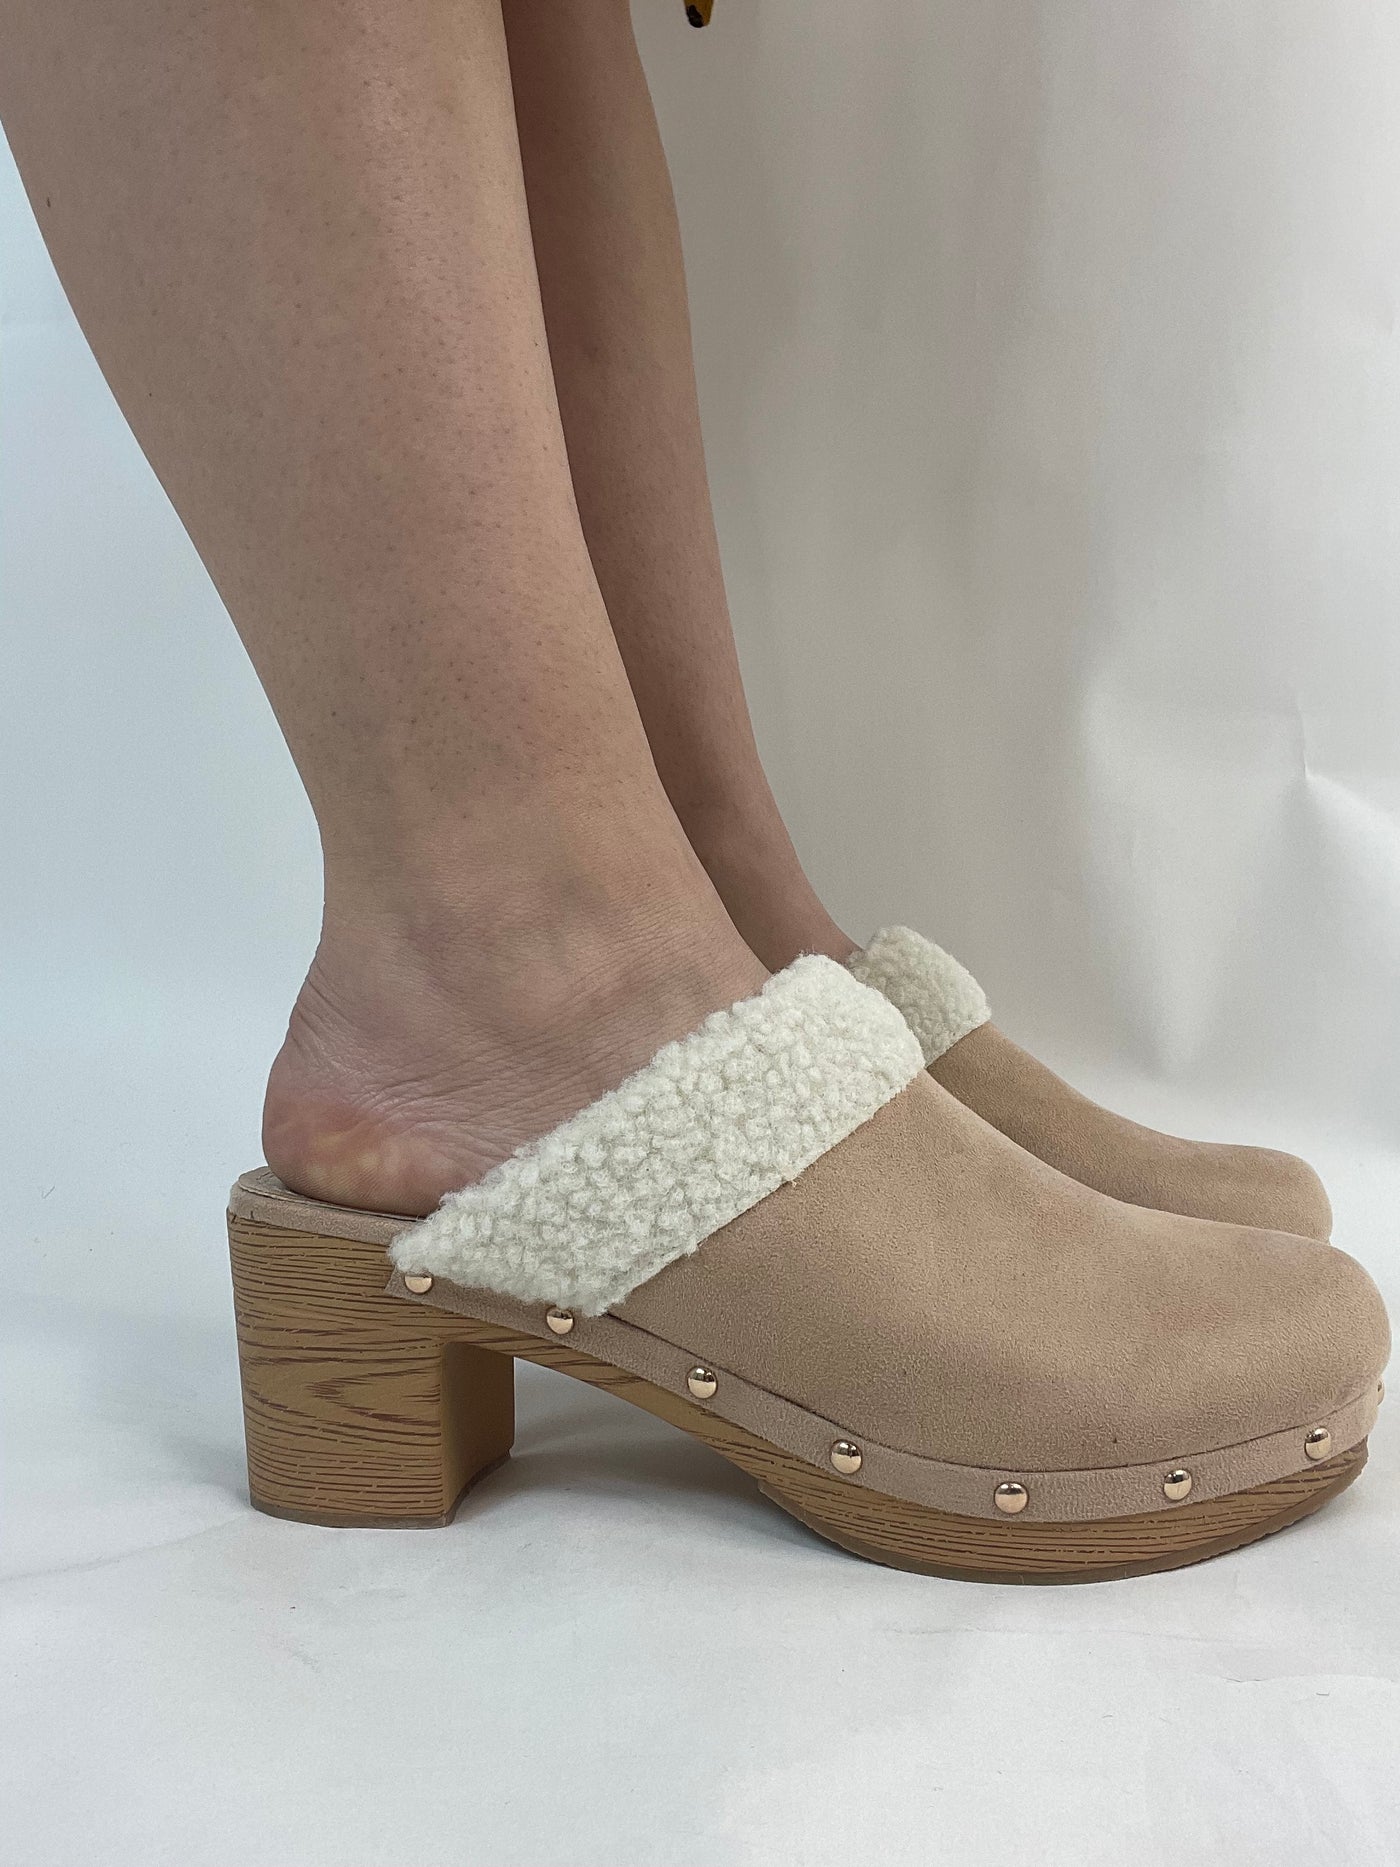 Nude pink faux suede and faux fur clogs.